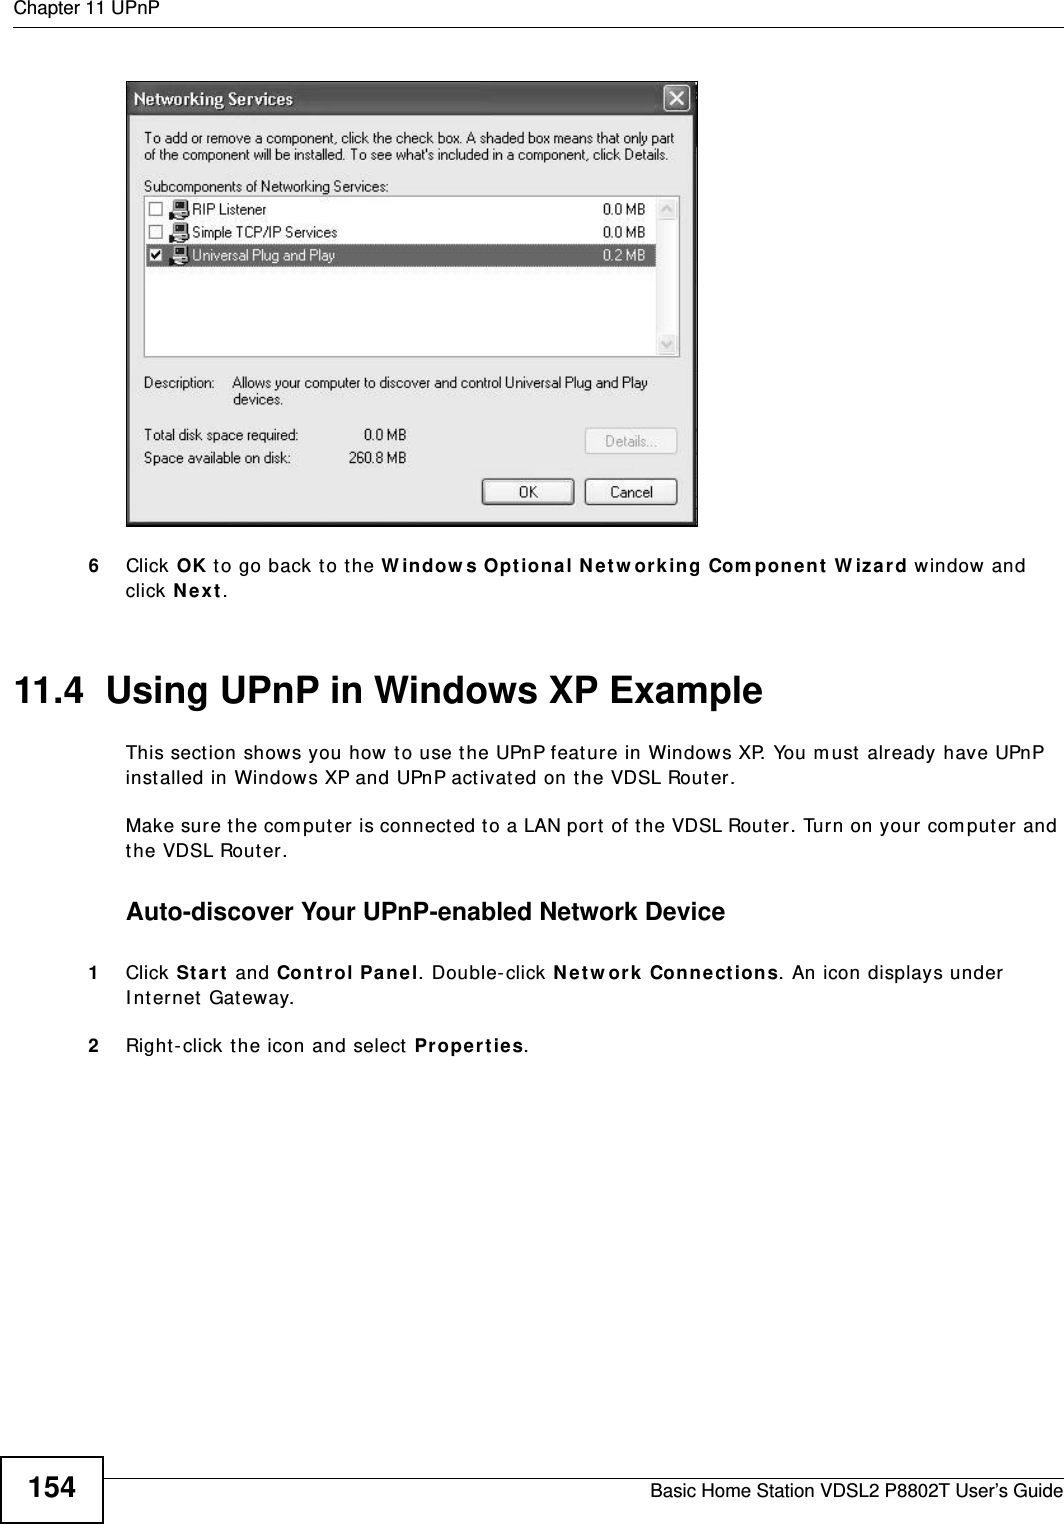 Chapter 11 UPnPBasic Home Station VDSL2 P8802T User’s Guide154Networking Services6Click OK to go back t o the W indow s Opt ional N etw ork ing Com pon en t  W iz ard window and click N e x t . 11.4  Using UPnP in Windows XP ExampleThis sect ion shows you how t o use the UPnP feature in Windows XP. You m ust  already have UPnP inst alled in Windows XP and UPnP act ivated on the VDSL Router.Make sure t he computer  is connected to a LAN port of the VDSL Router. Turn on your com puter and the VDSL Router. Auto-discover Your UPnP-enabled Network Device1Click St a r t  and Cont r ol Pa ne l. Double- click N e t w or k Connect ions. An icon displays under I nt ernet  Gat eway.2Right-click t he icon and select  Pr ope r t ie s. 